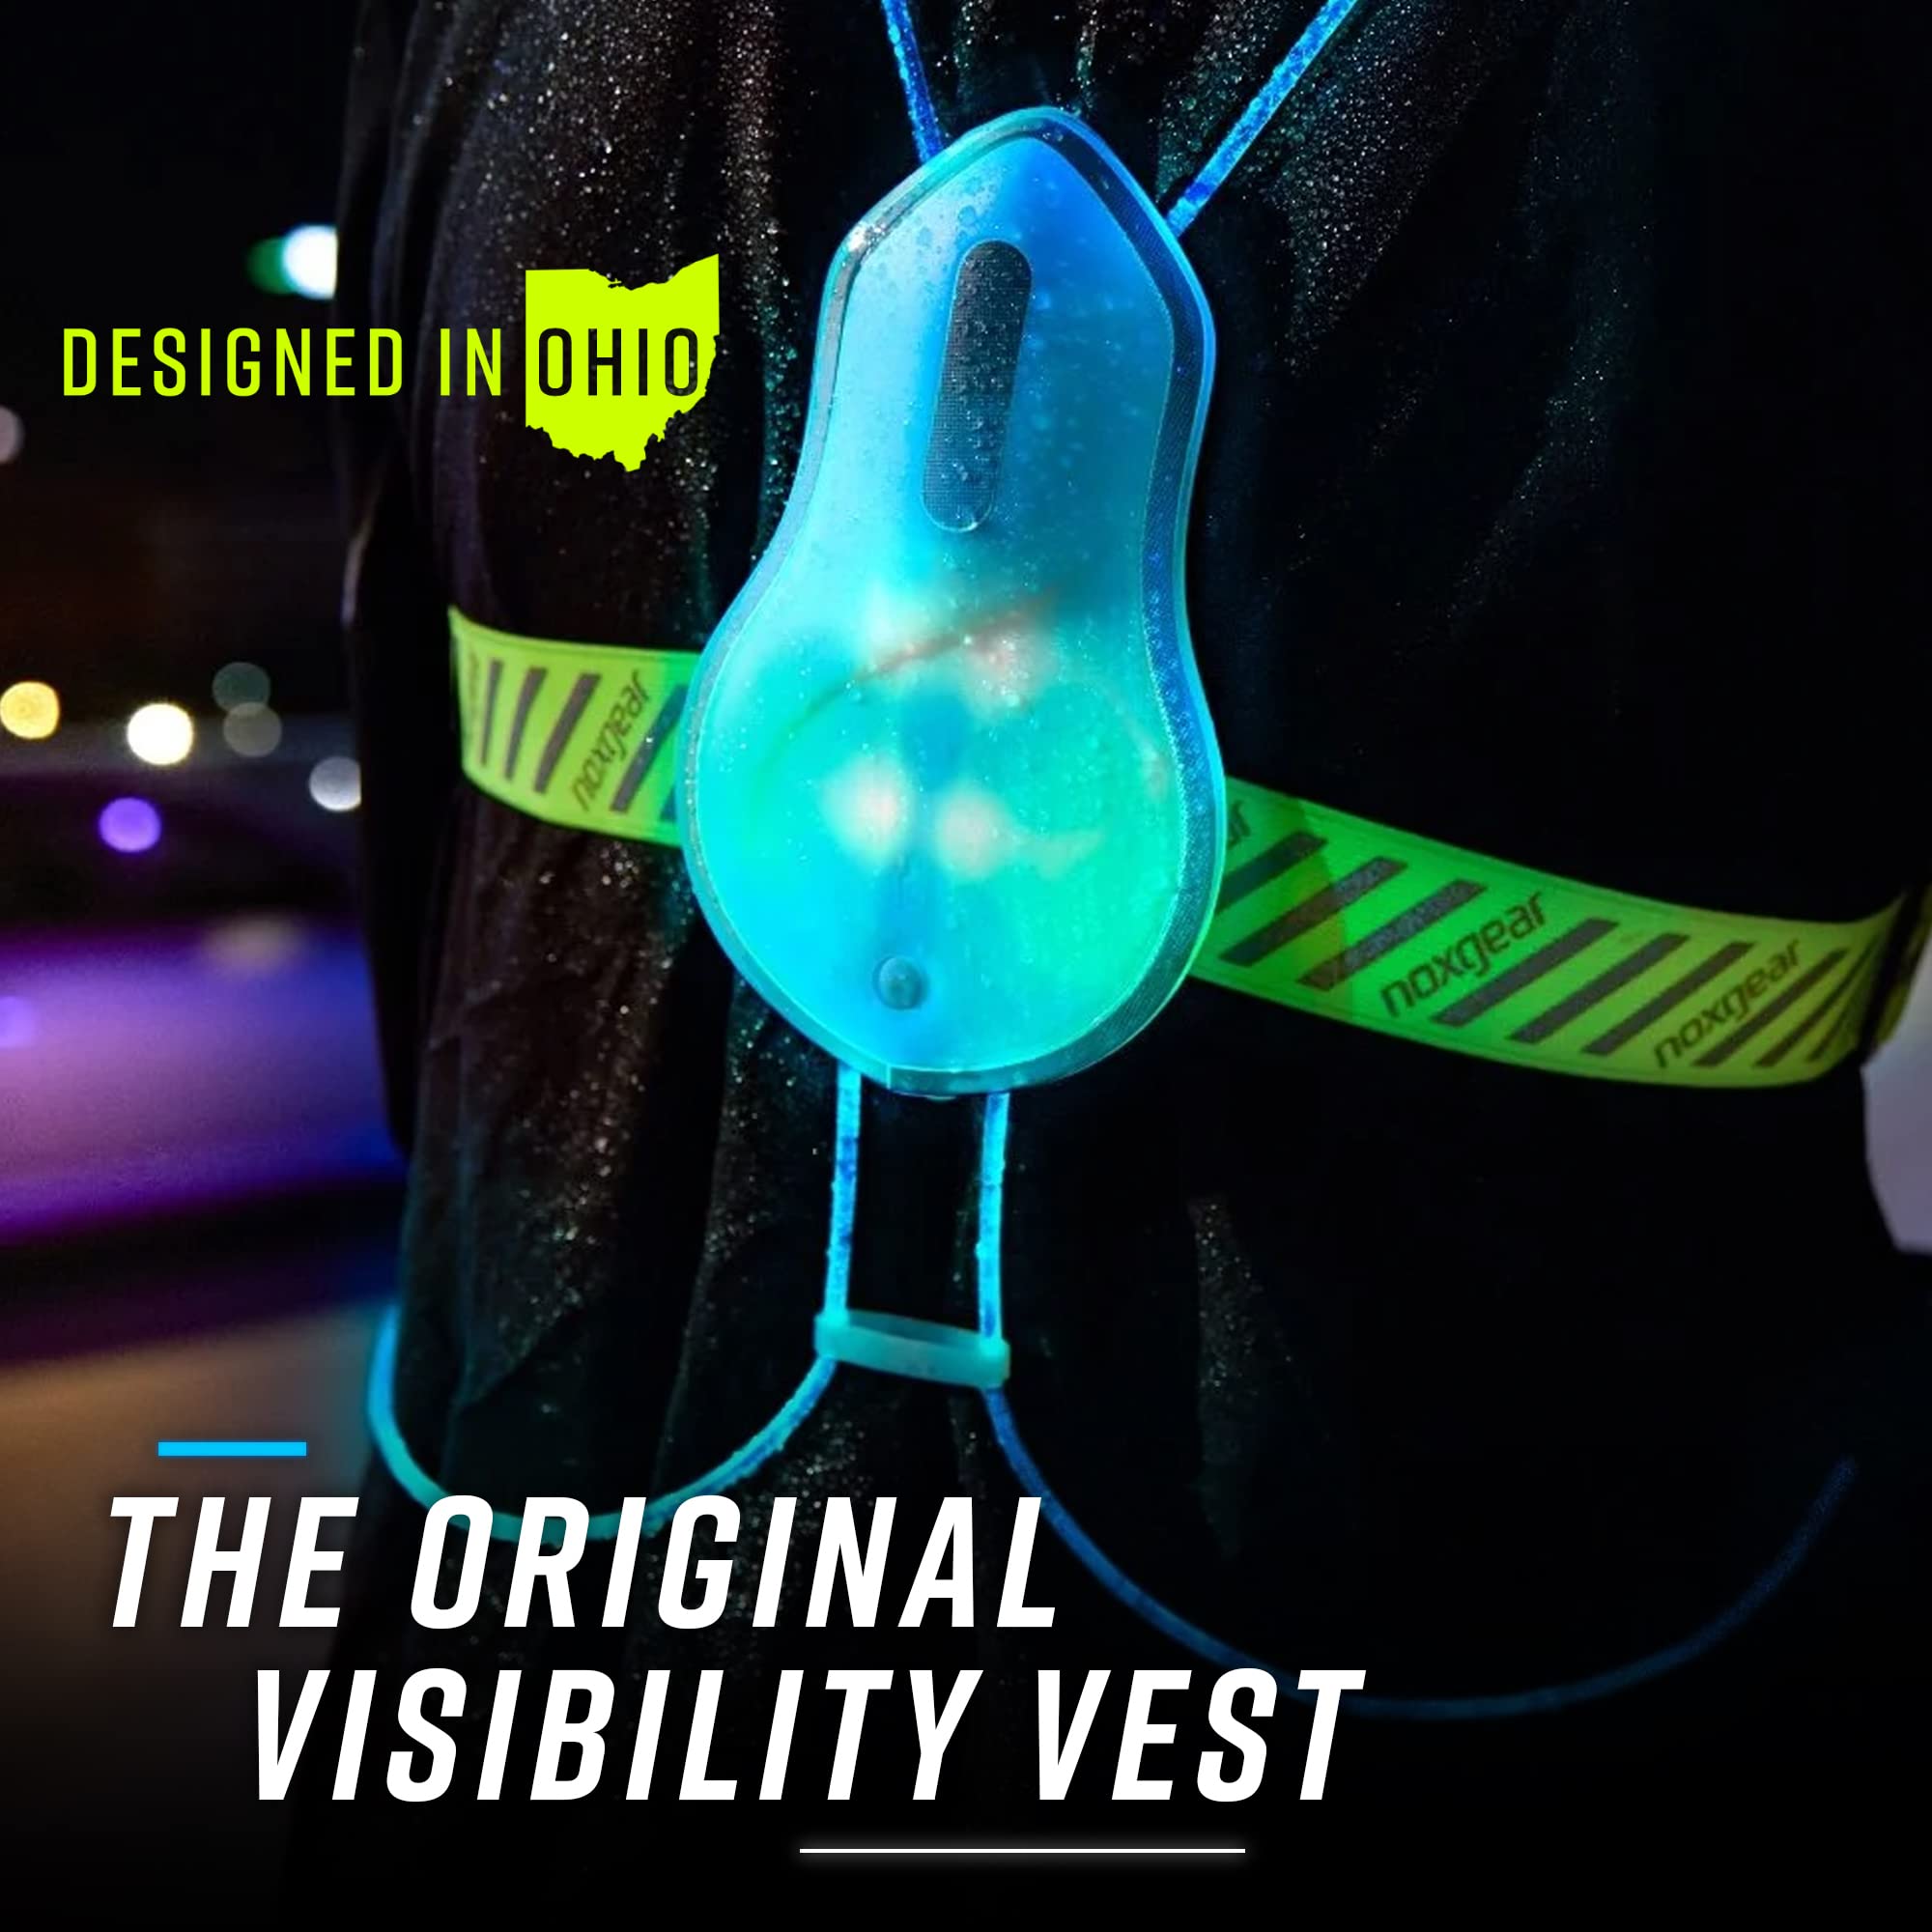 noxgear Tracer2 - Multicolor Illuminated, Reflective Vest for Running or Cycling (Rechargeable, Waterproof)